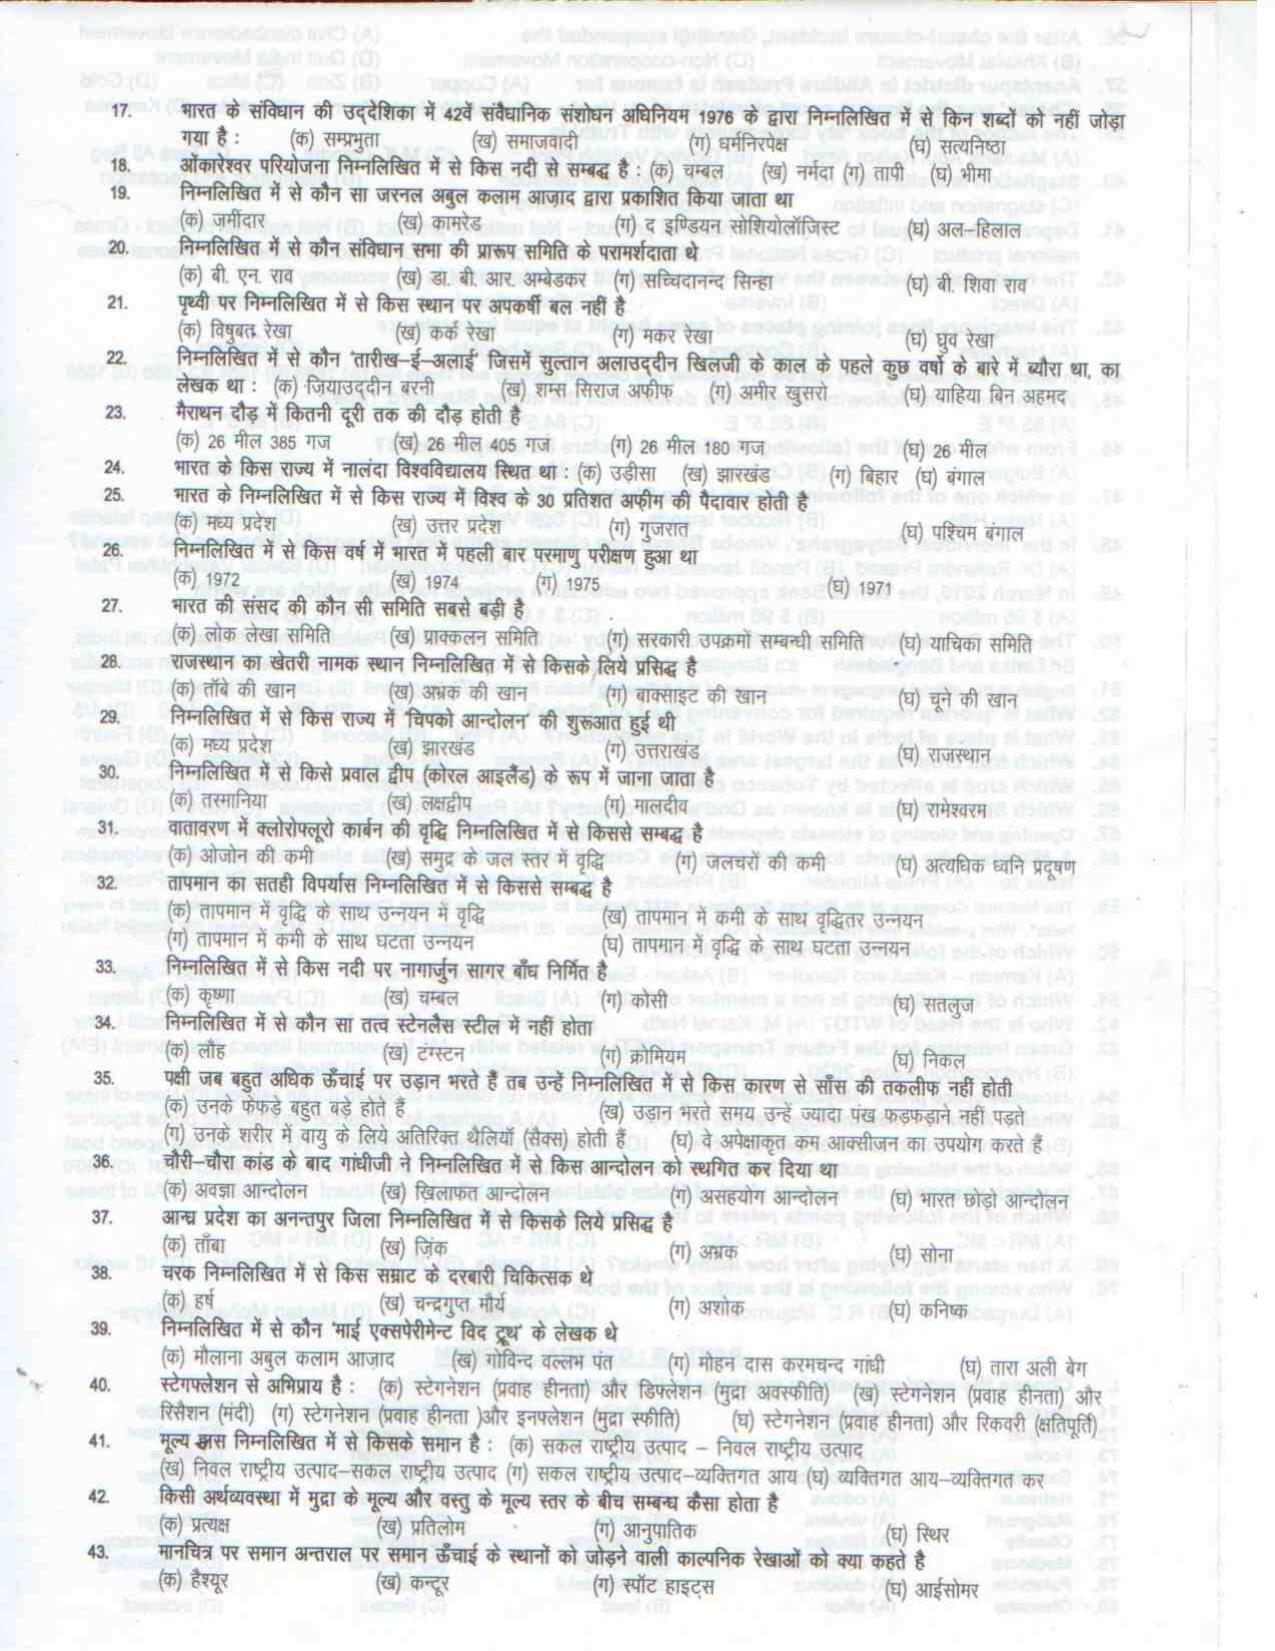 TS EAMCET 2010 Lok-Rajya Sabha: Security Assistant Grade-II Question Paper with Key (1 August 2010 Held on) - Page 7